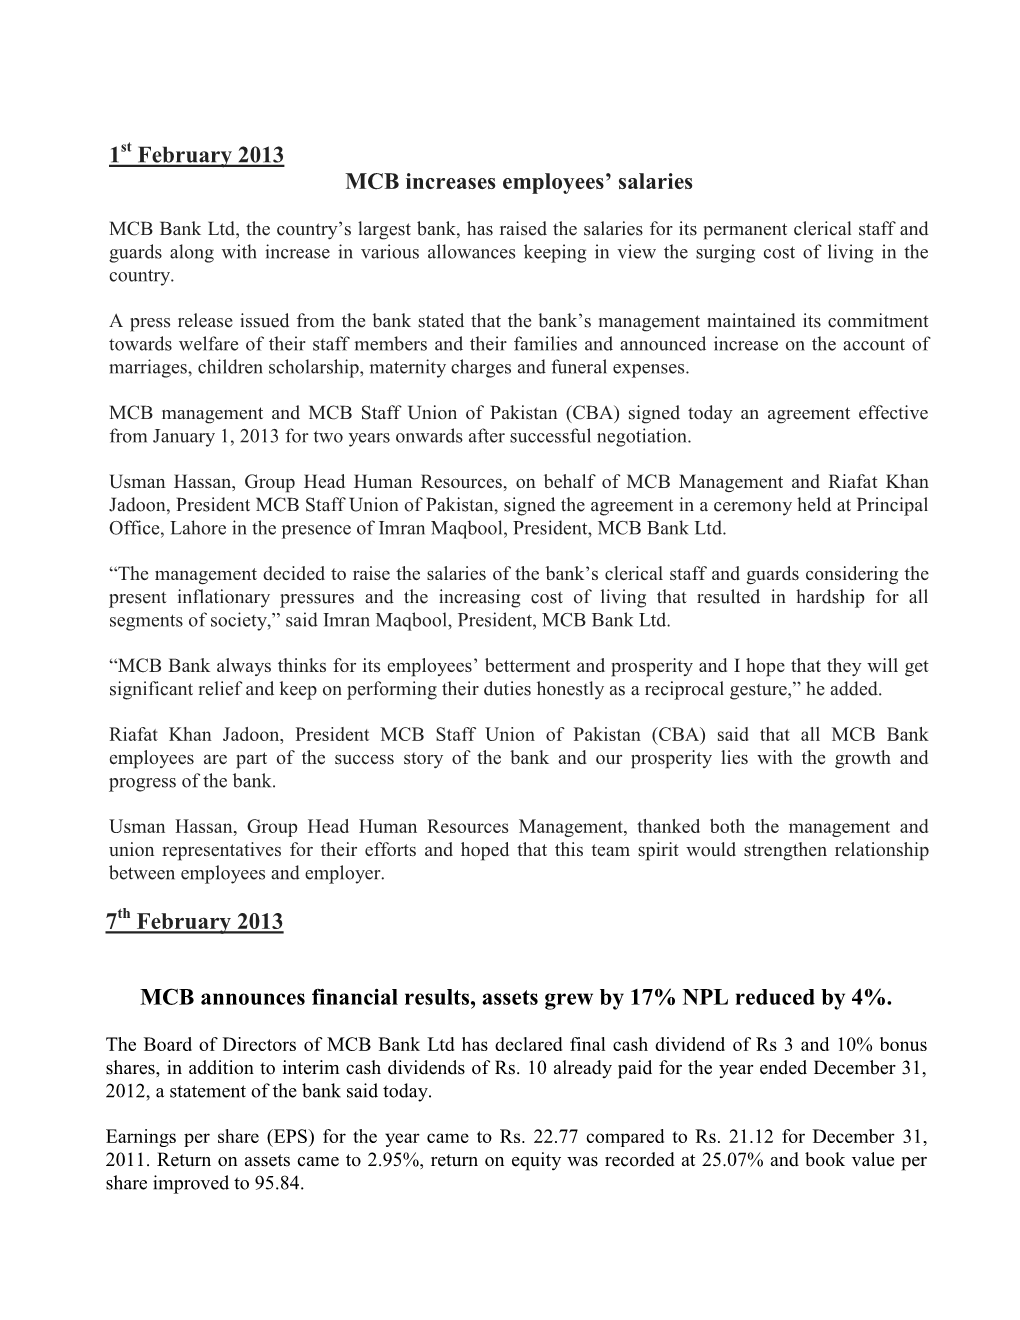 Press Releases from January to March 2013